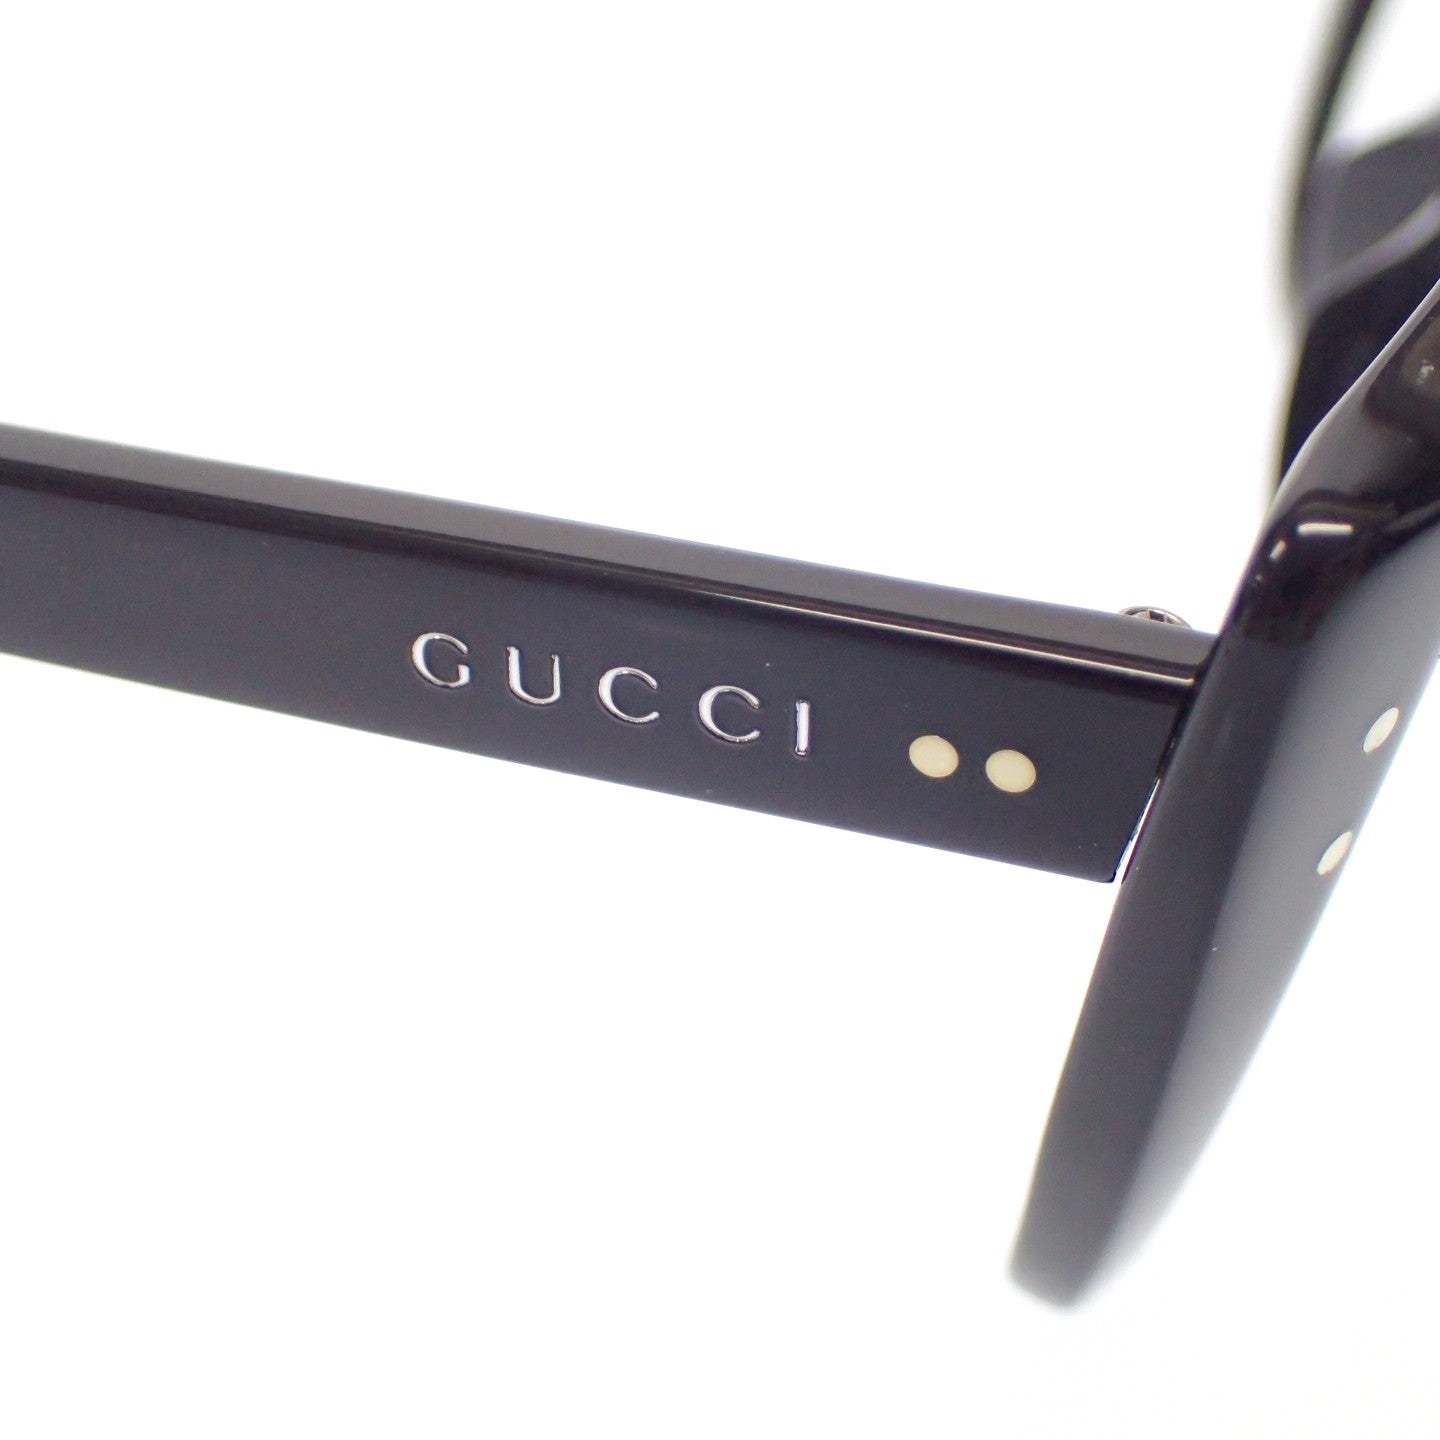 Unused ◆ Gucci Date Glasses Clear Lens 54□18-145 GG0474O Black With Case Ladies GUCCI [AFI14] 